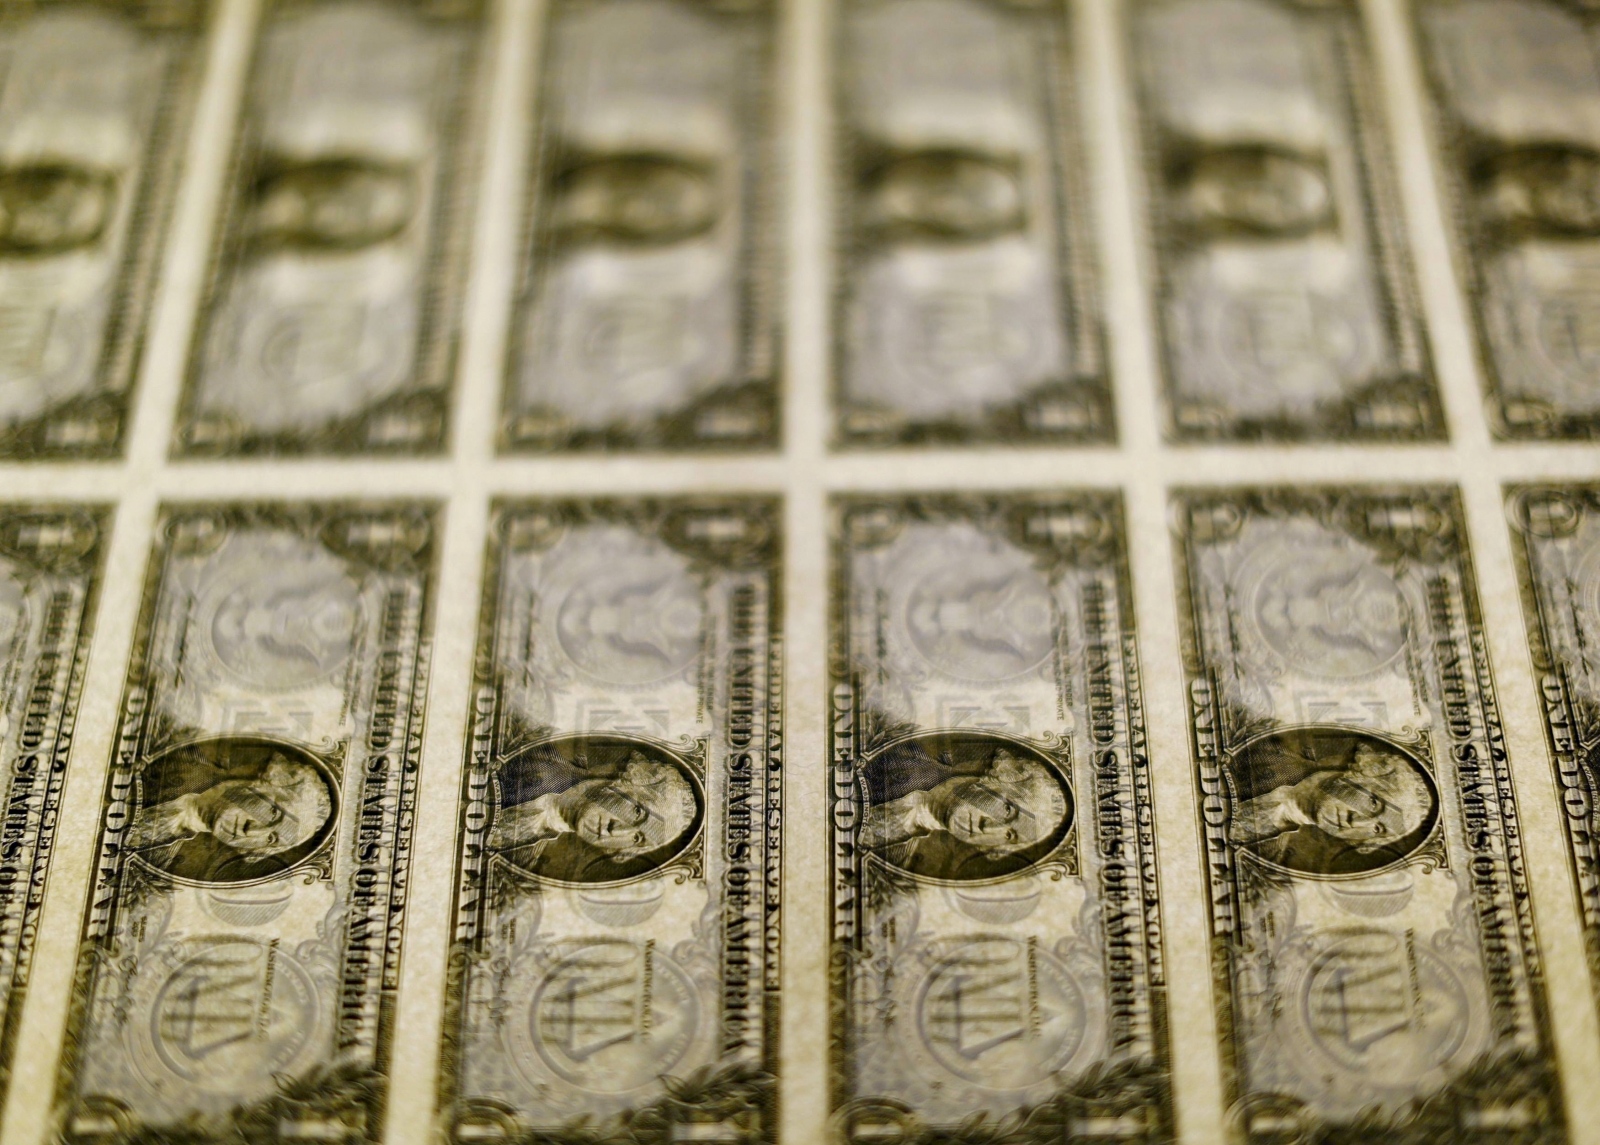 FILE PHOTO: United States one dollar bills seen on a light table at the Bureau of Engraving and Printing in Washington FILE PHOTO: United States one dollar bills are seen on a light table at the Bureau of Engraving and Printing in Washington November 14, 2014. REUTERS/Gary Cameron/File Photo Gary Cameron